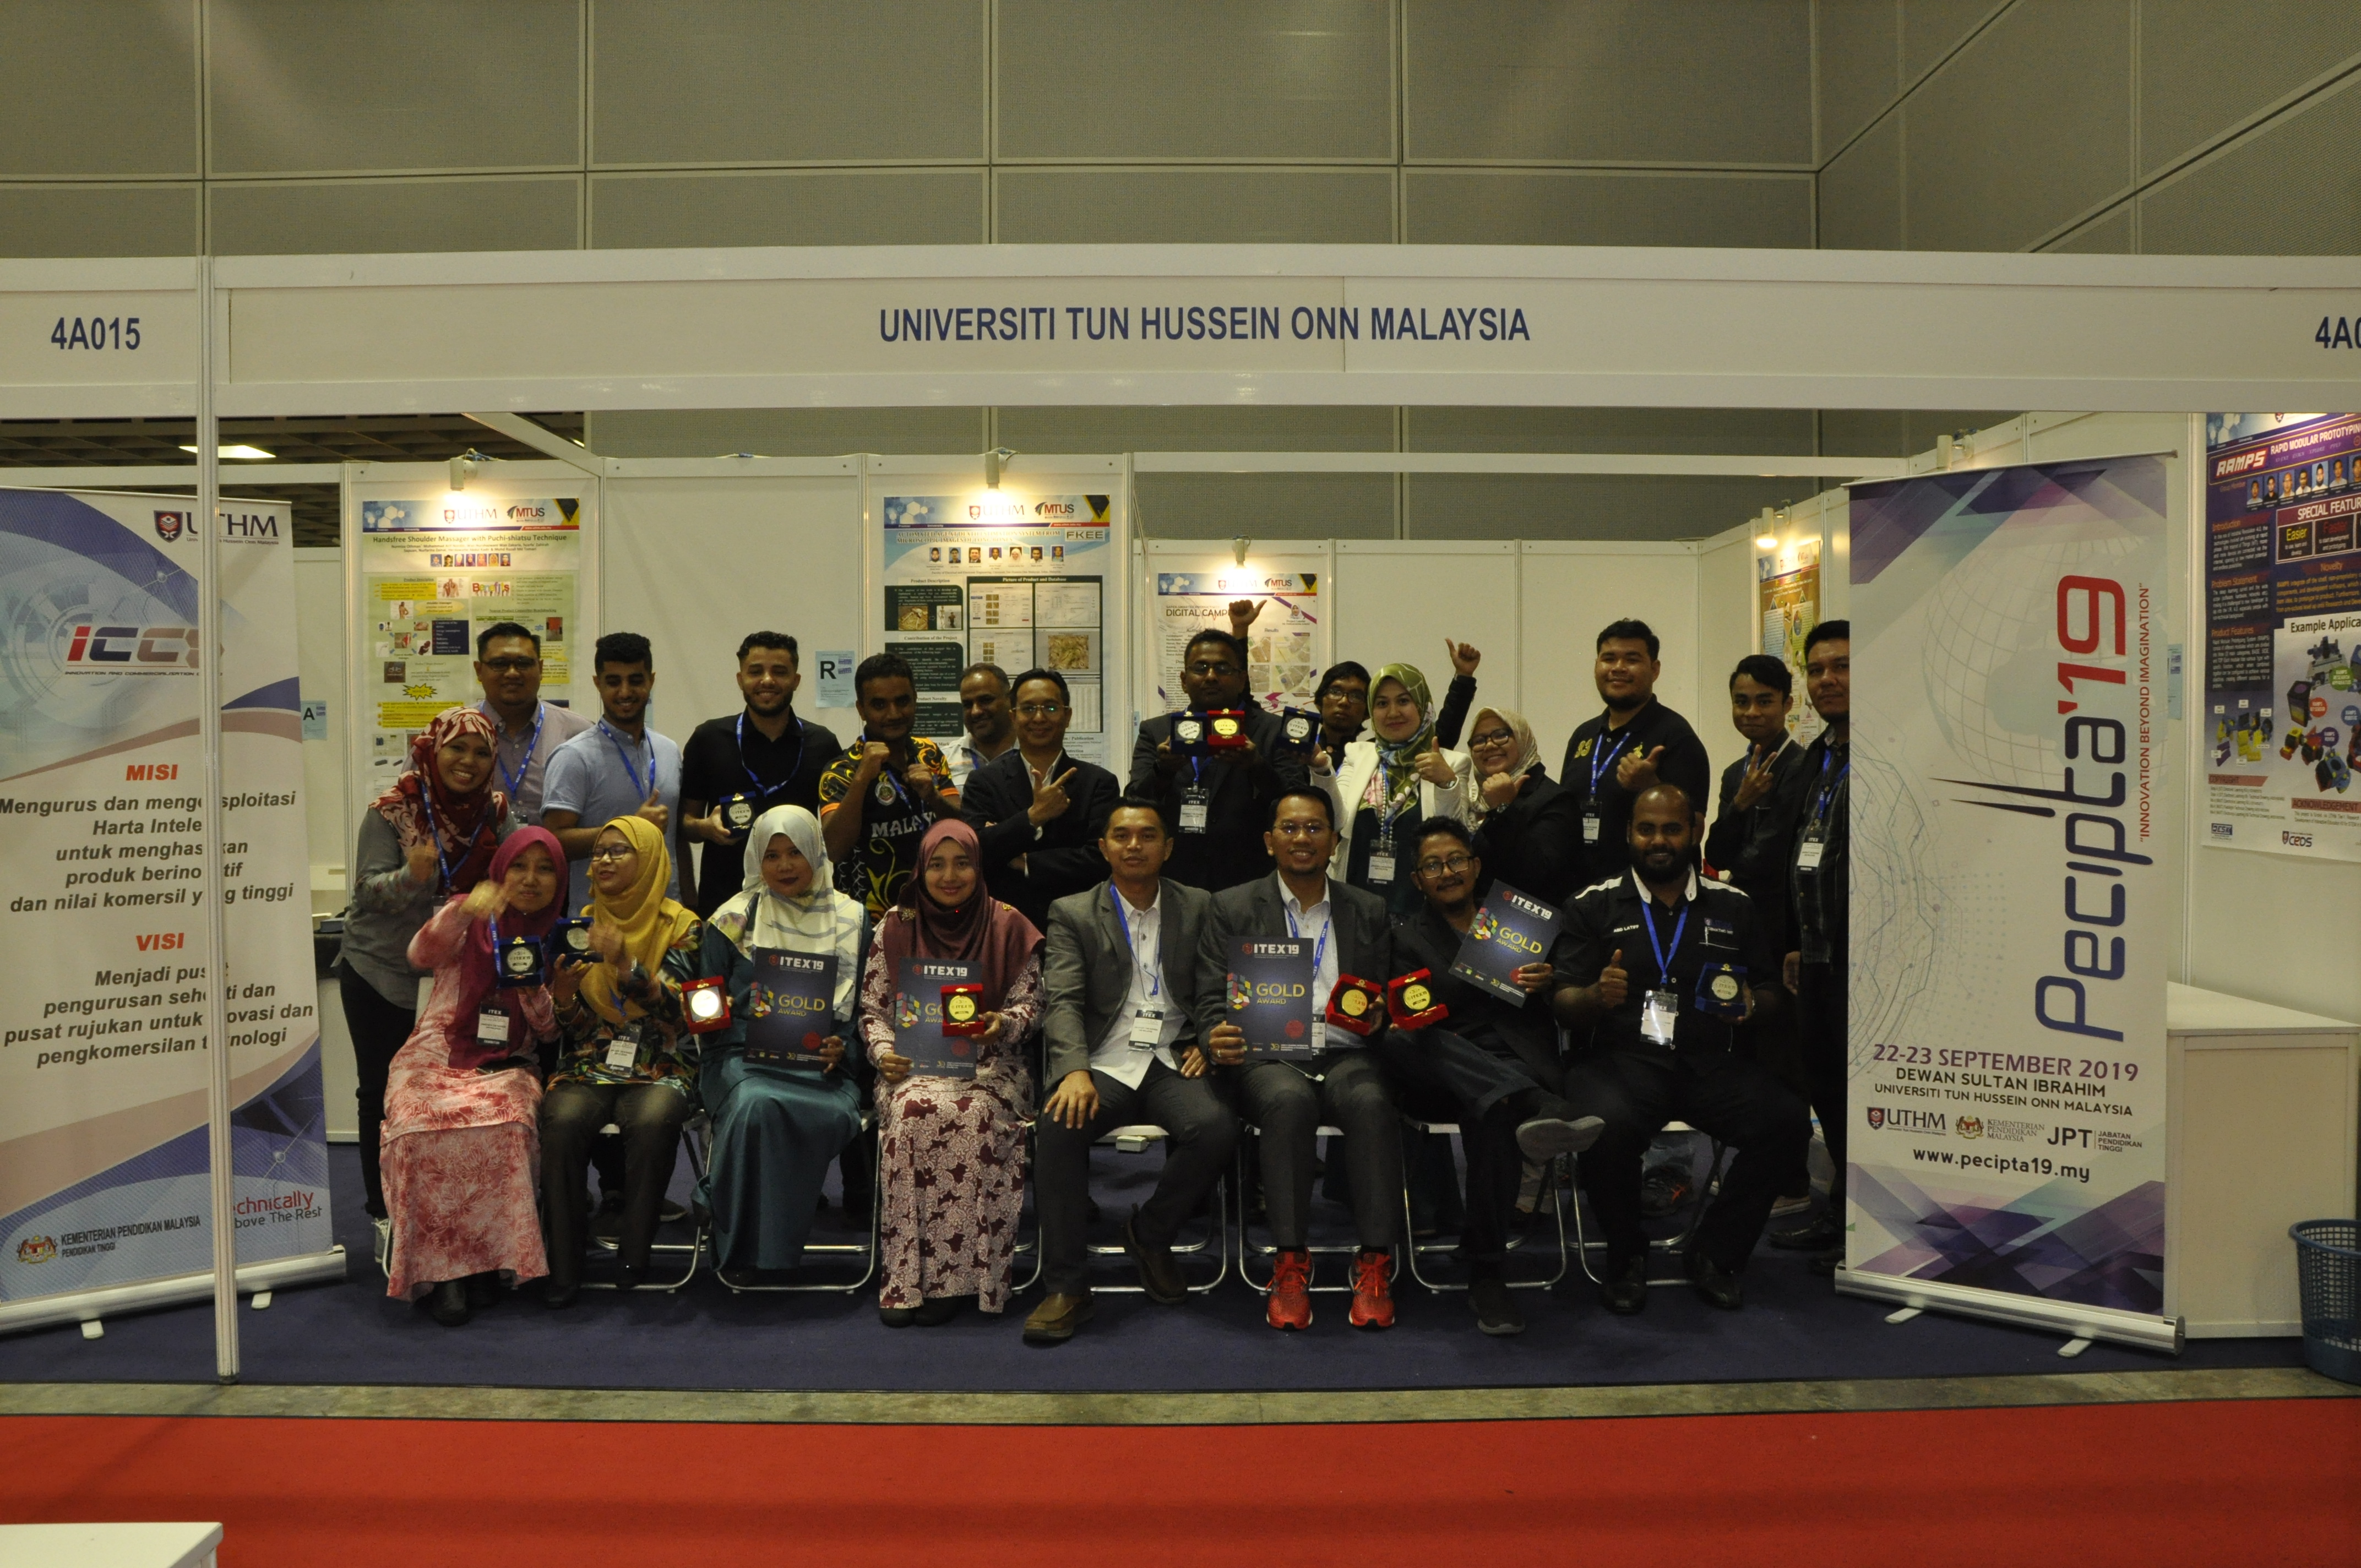 UTHM wins 10 medals at ITEX 2019